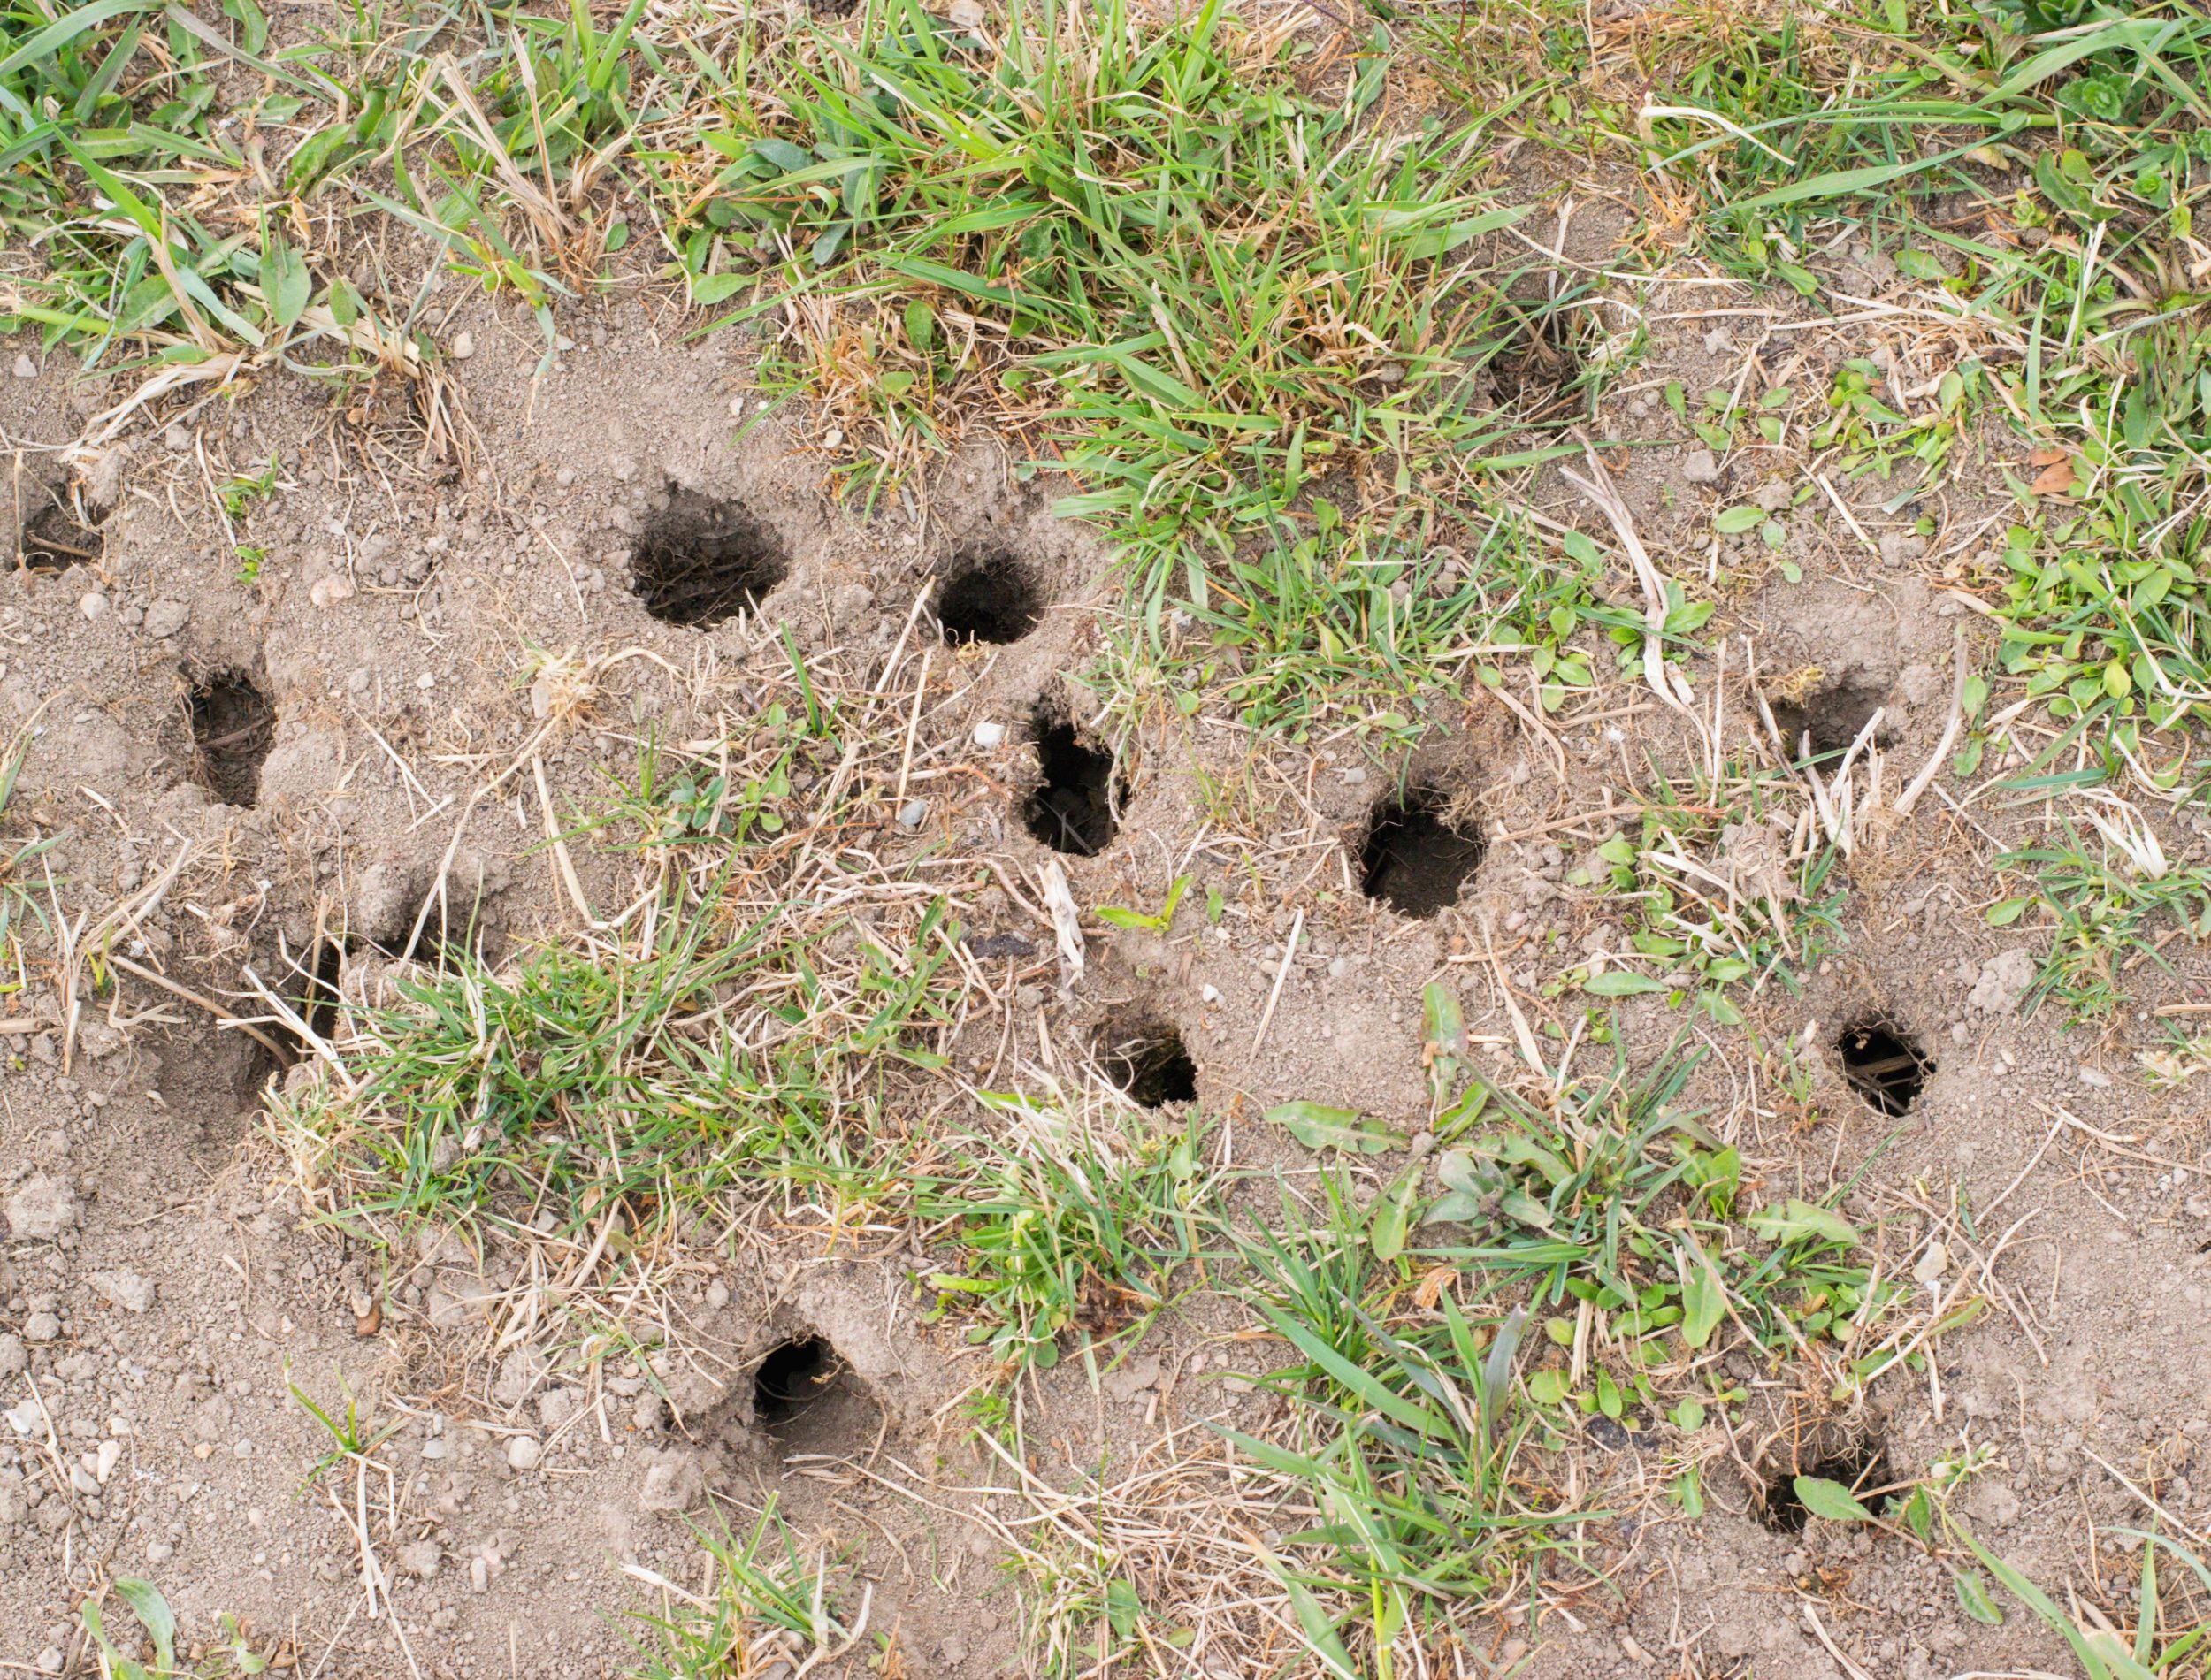 mole and vole holes in the garden